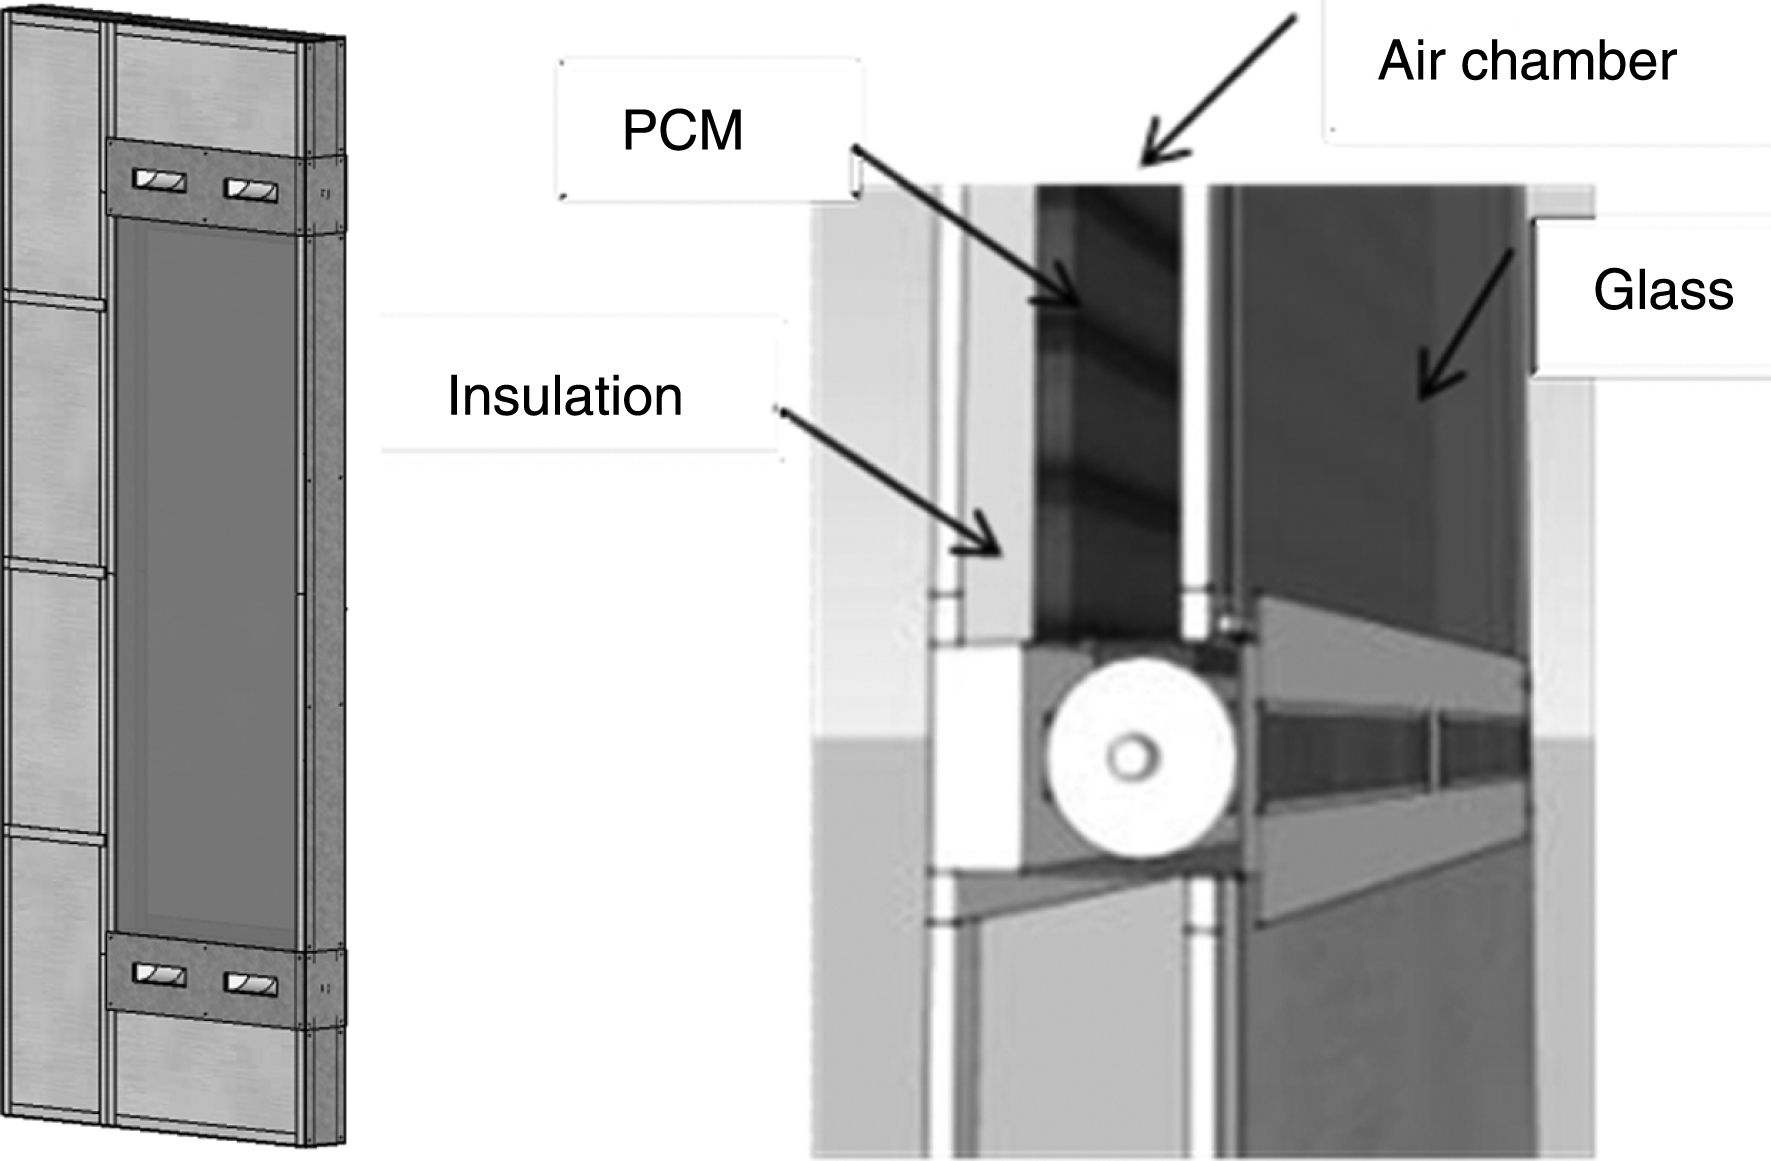 Schematic overall layout of the PCMESW system (left) and detailed cross section near the bottom air inlet (right).